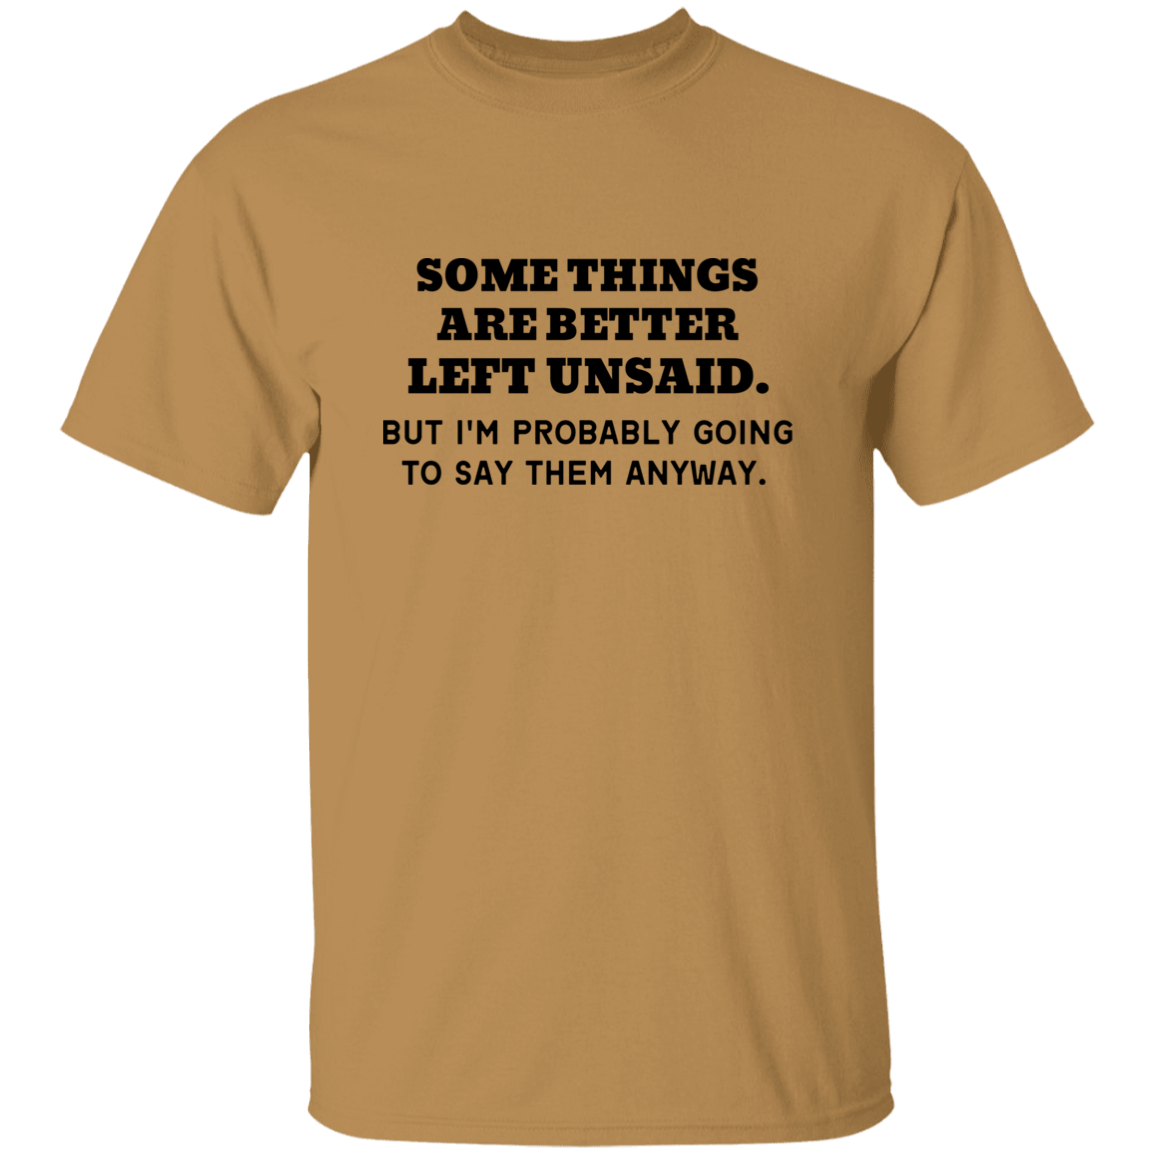 Some things are better left Unsaid T-Shirt, Funny Quote Shirts, Feminist Shirt, Novelty T-shirt, Sarcastic T-shirt